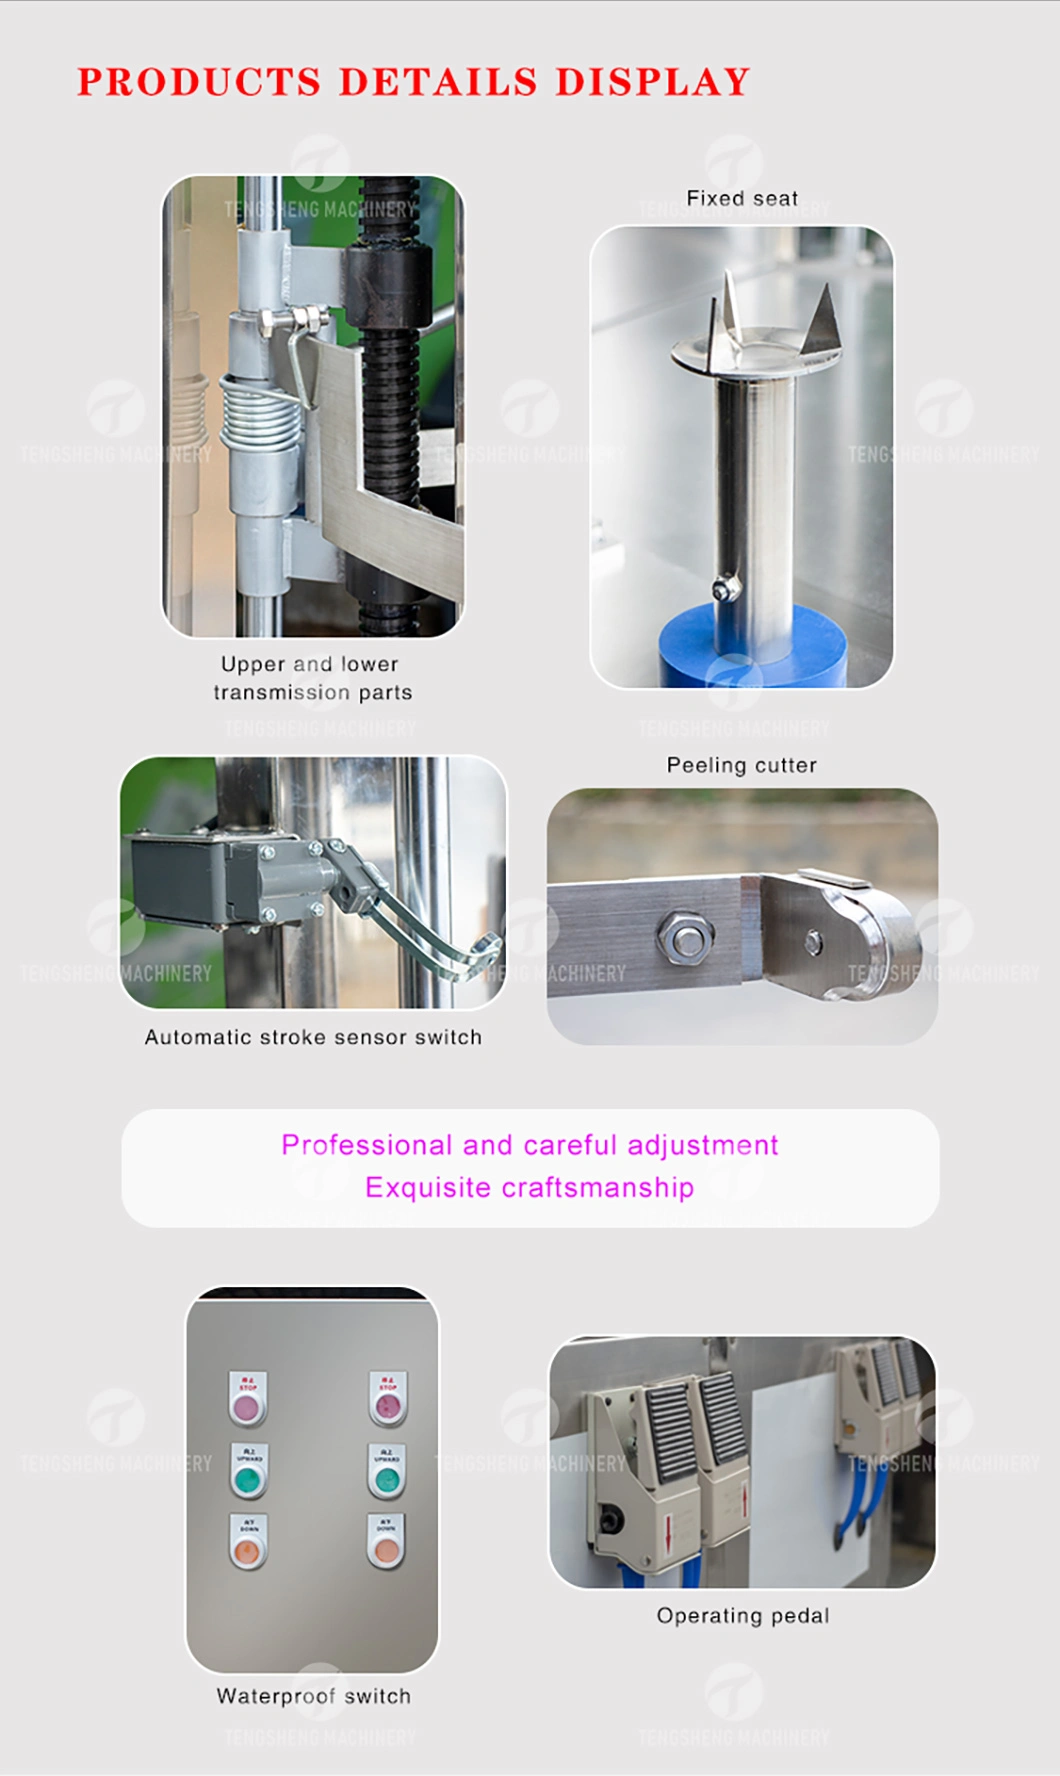 Industrial Vegetable Peeler Double-Head Electric Peeler Large Melon and Fruit Processing Machine (TS-P100)